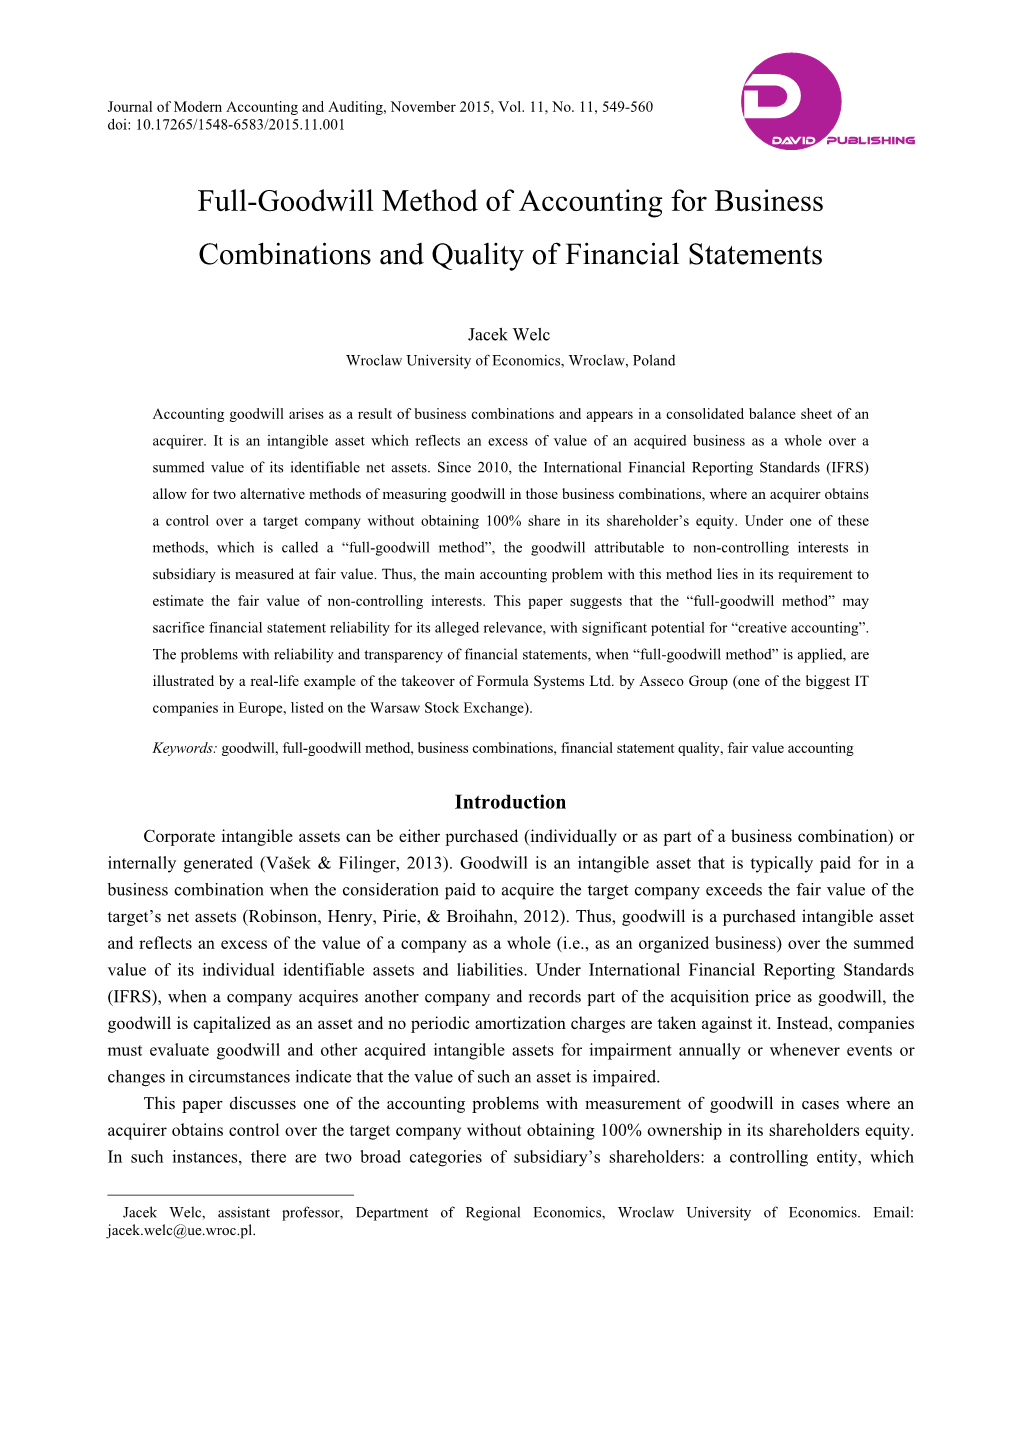 Full-Goodwill Method of Accounting for Business Combinations and Quality of Financial Statements